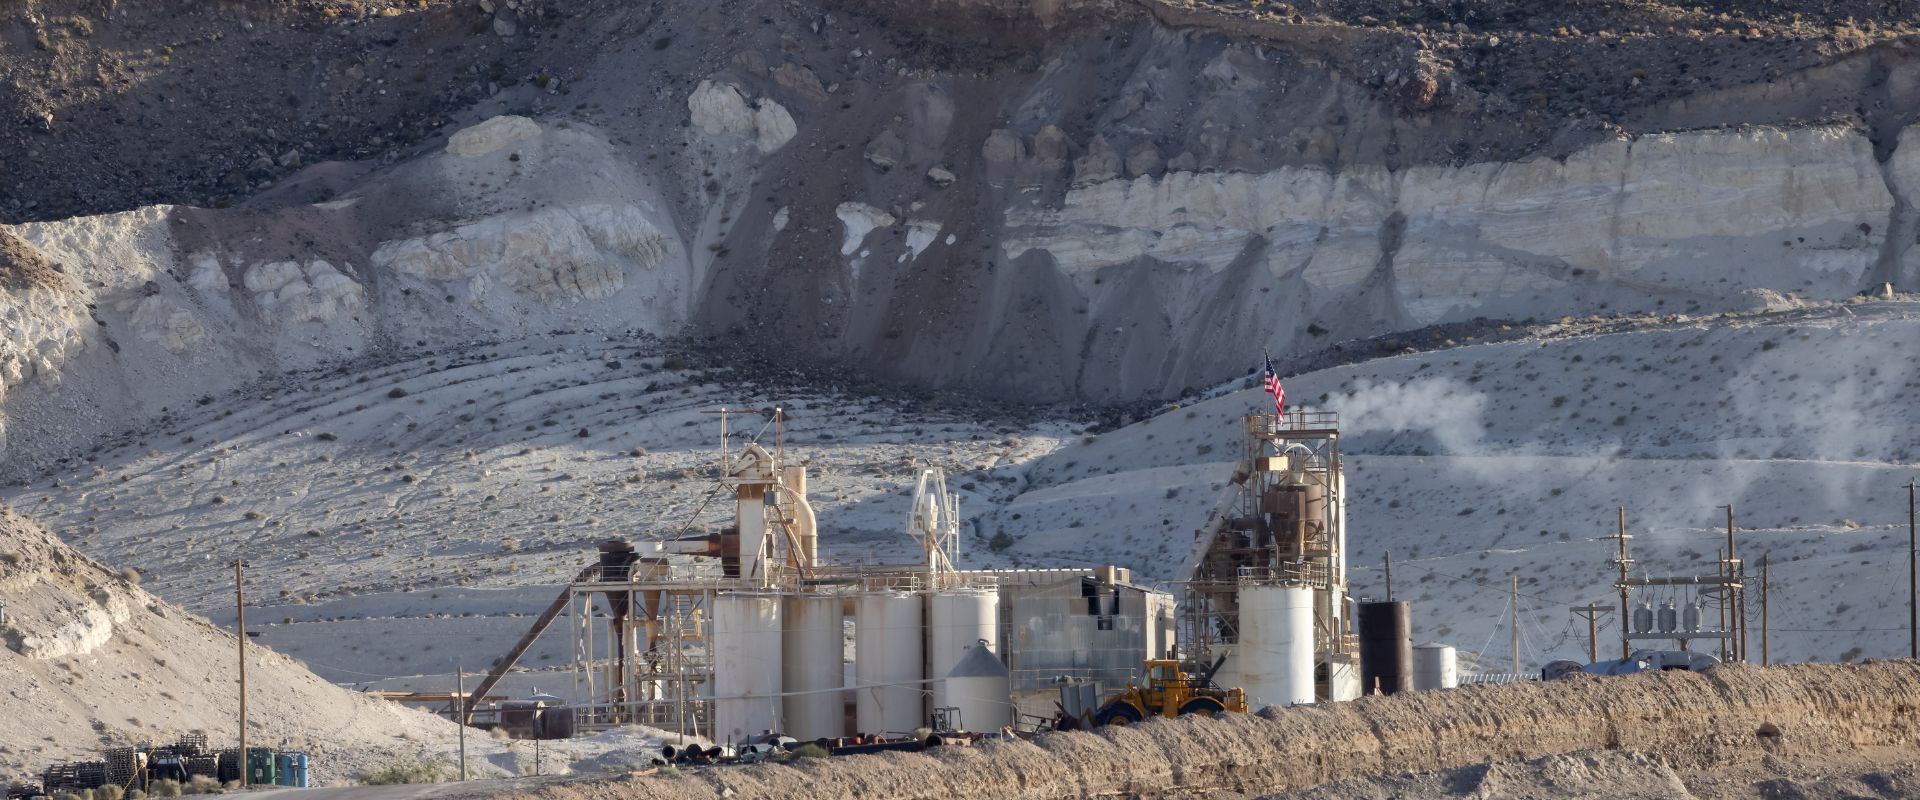 mining station in the United States Nevada